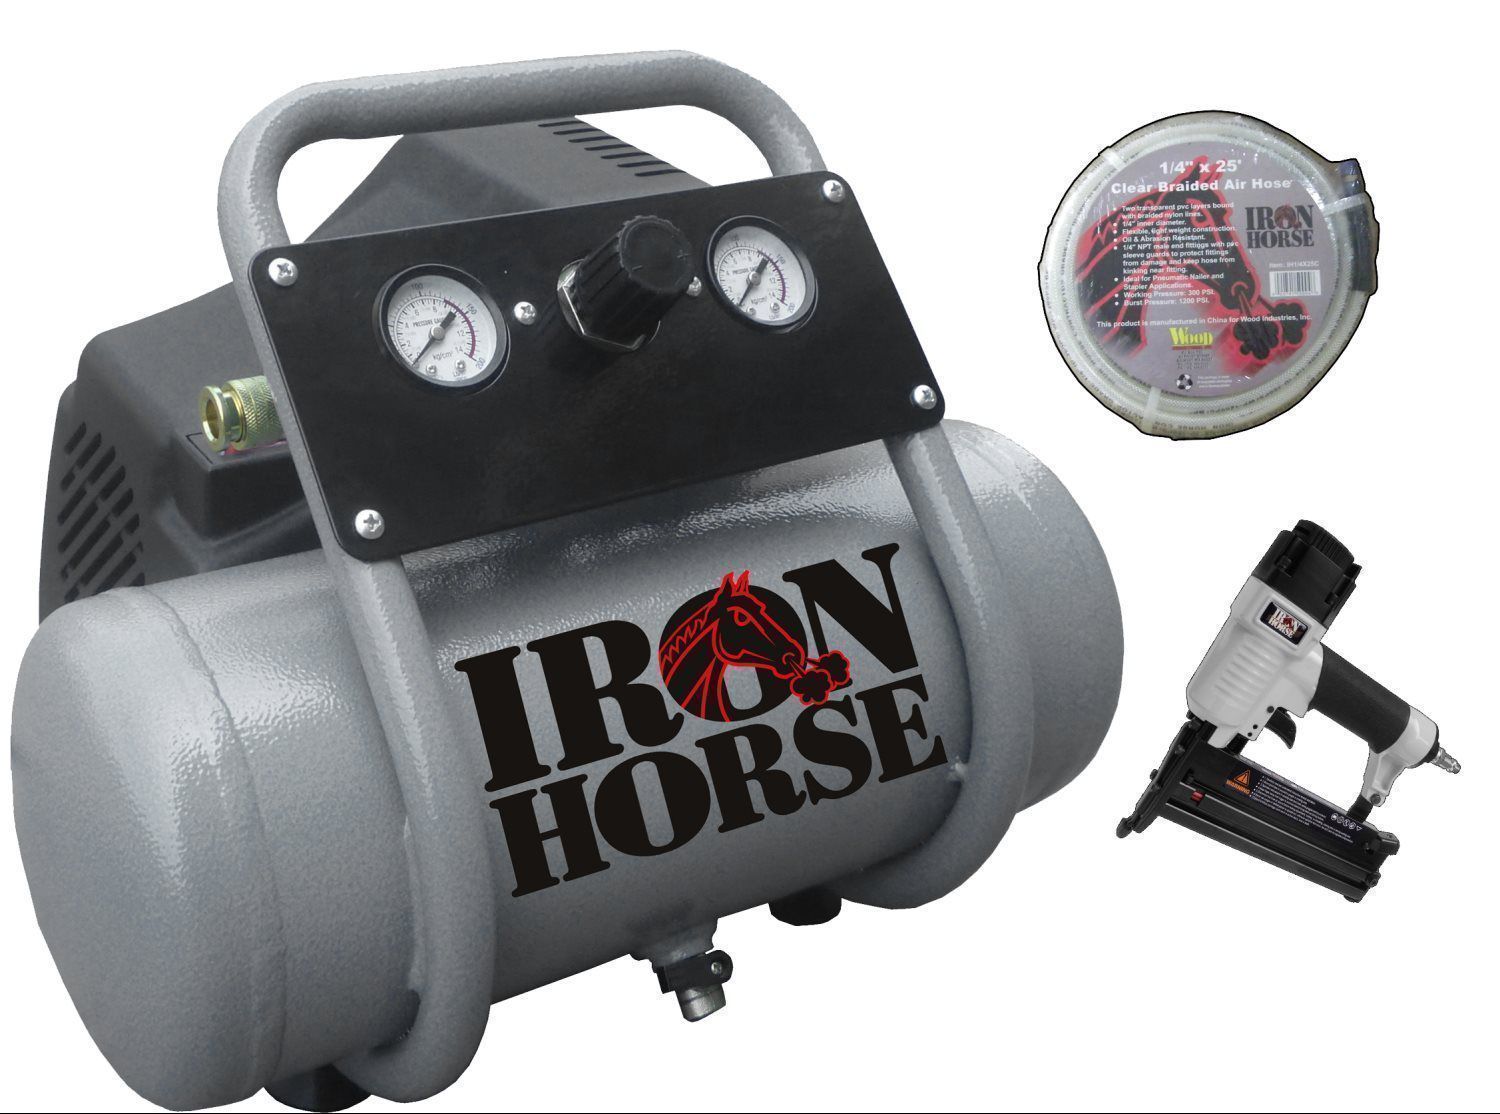 Iron Horse Hot Dog Style 1 Horse Power-iron horse air compressors-Tool Mart Inc.